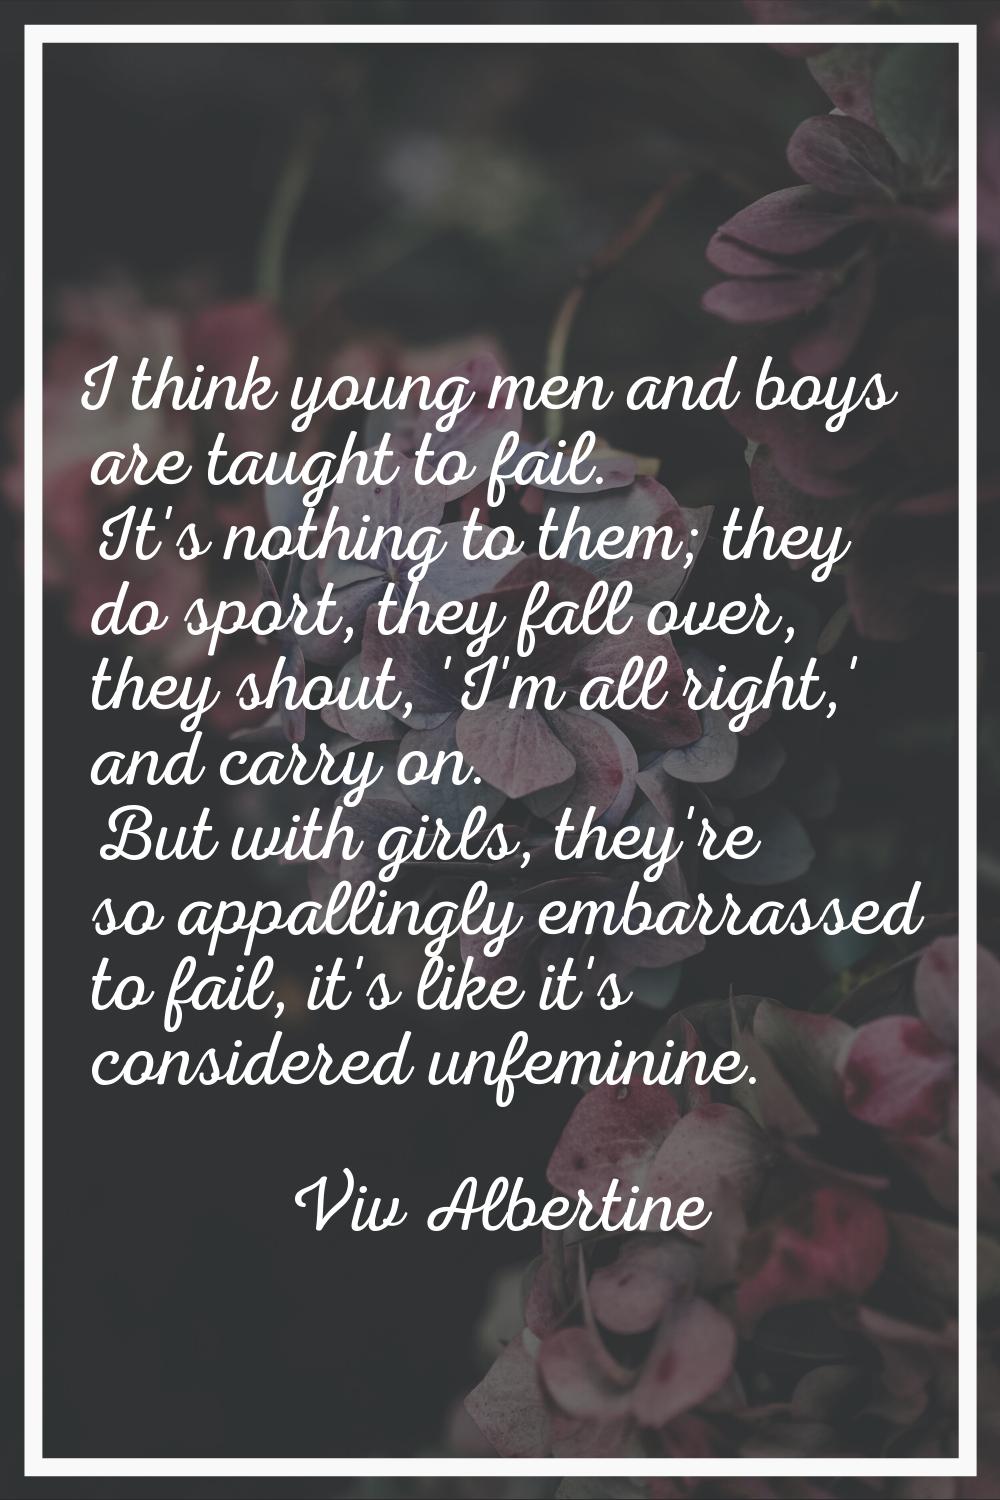 I think young men and boys are taught to fail. It's nothing to them; they do sport, they fall over,